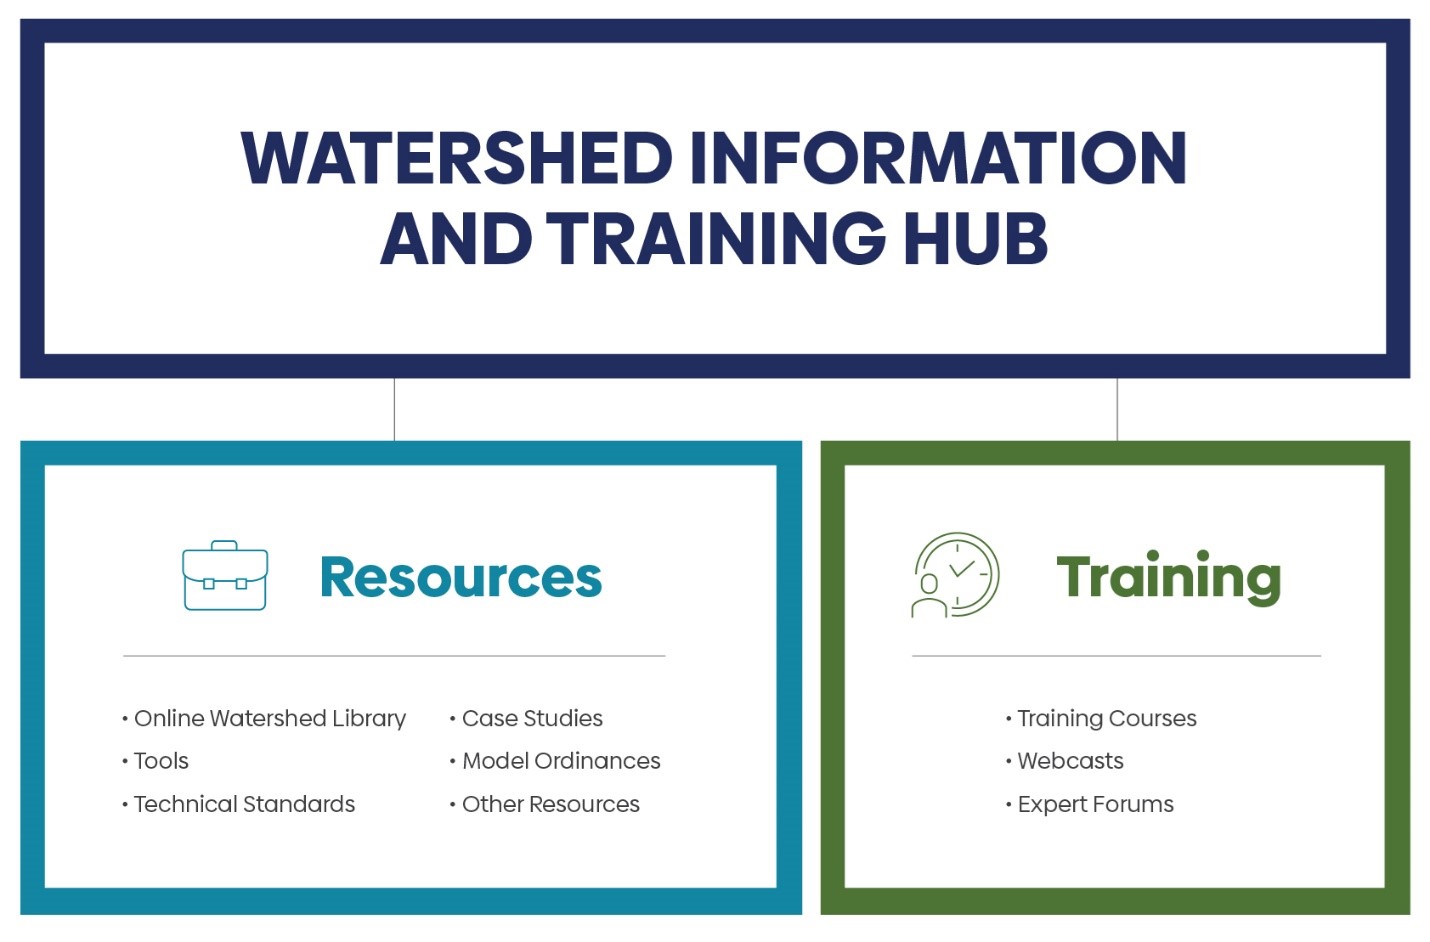 Watershed Information and Training Hub graphic